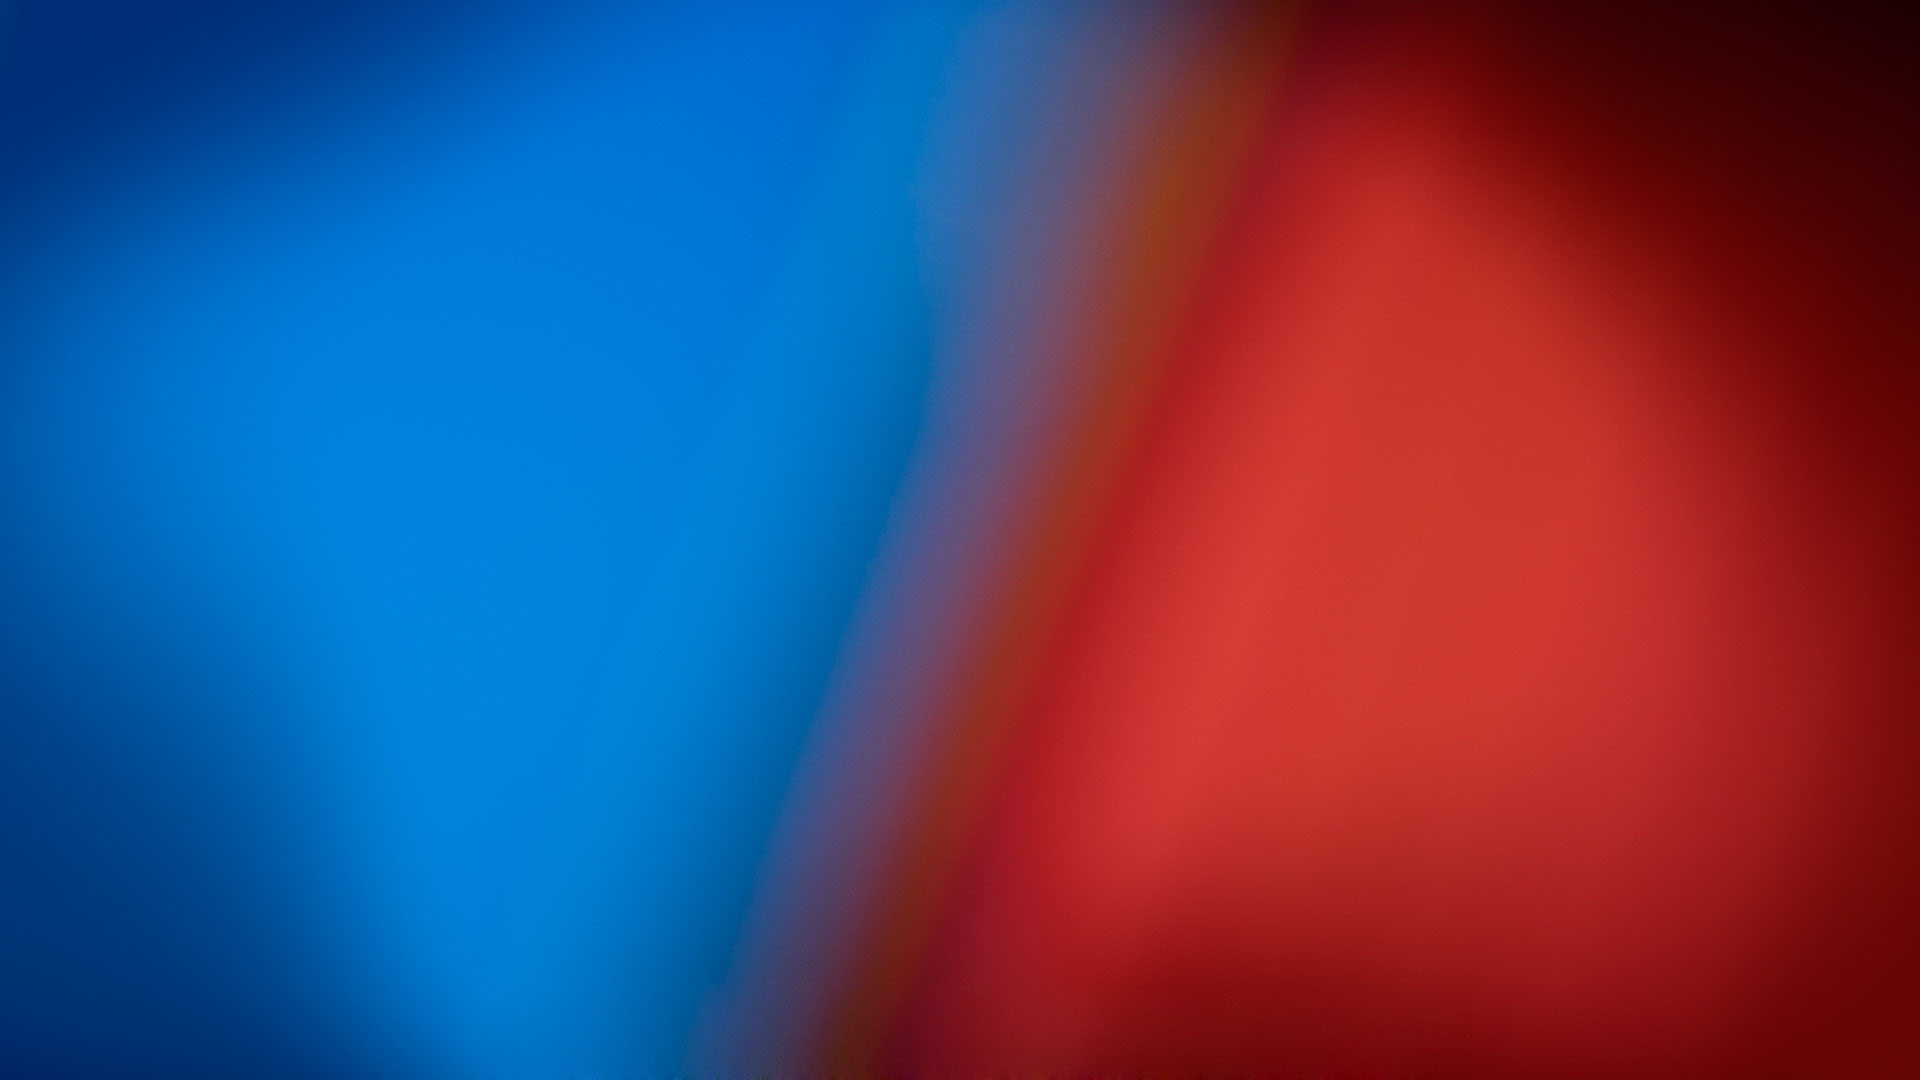 Blue and Red Blurred Art